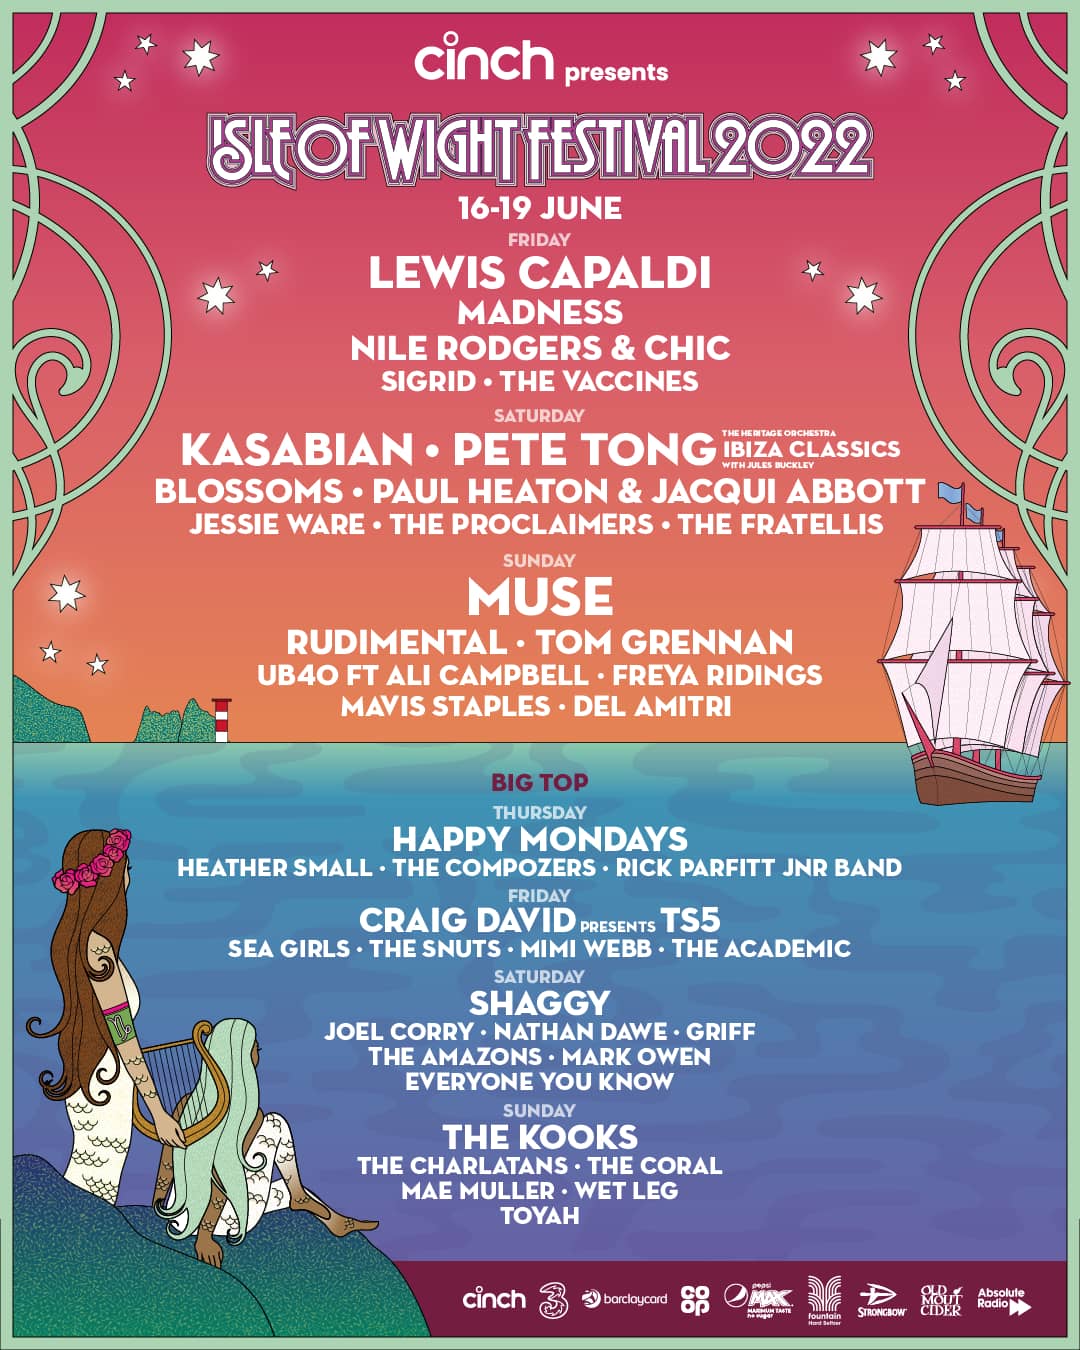 Isle of Wight Festival 2022 Latest acts include Madness, Jessie Ware